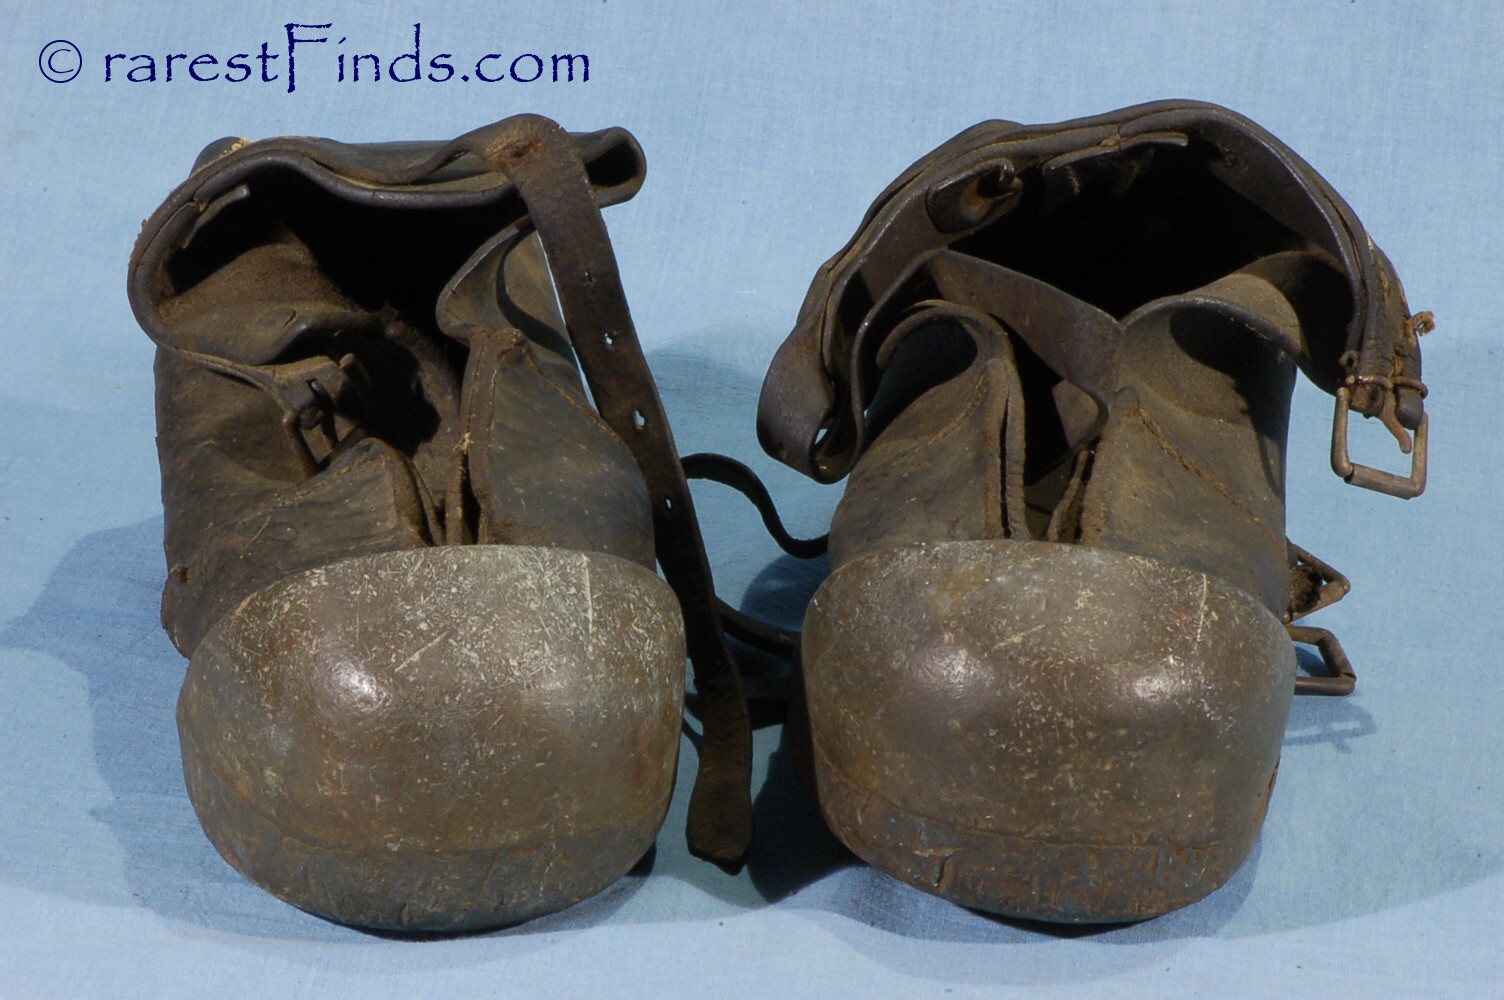 Antique-Deep-Sea-Heavy-Weight-Bronze-Lead-Diver-Boots-Shoes